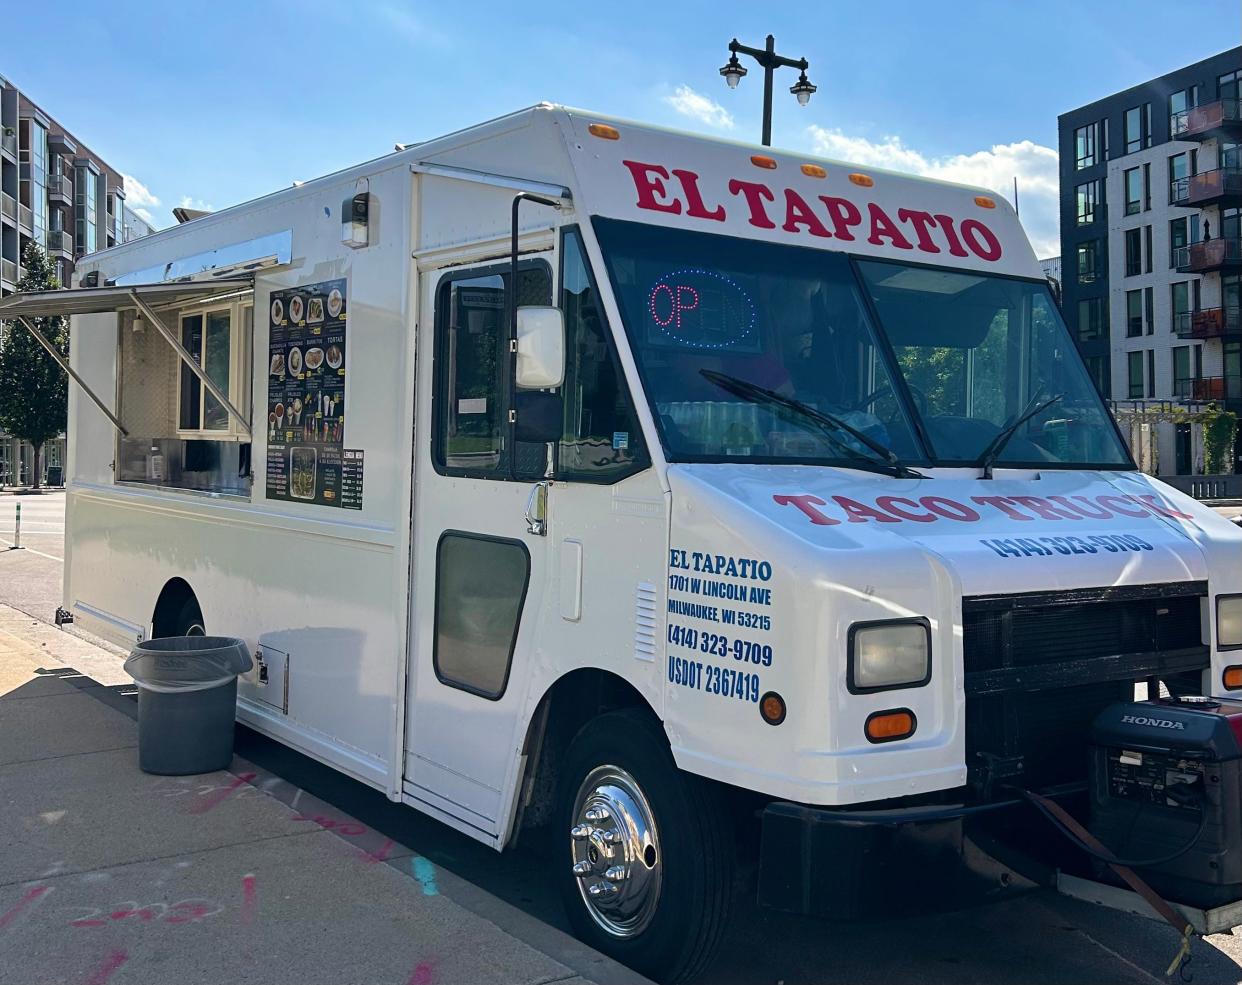 According to our dining critic, El Tapatio's fleet of trucks serve some of the best tacos in Milwaukee.